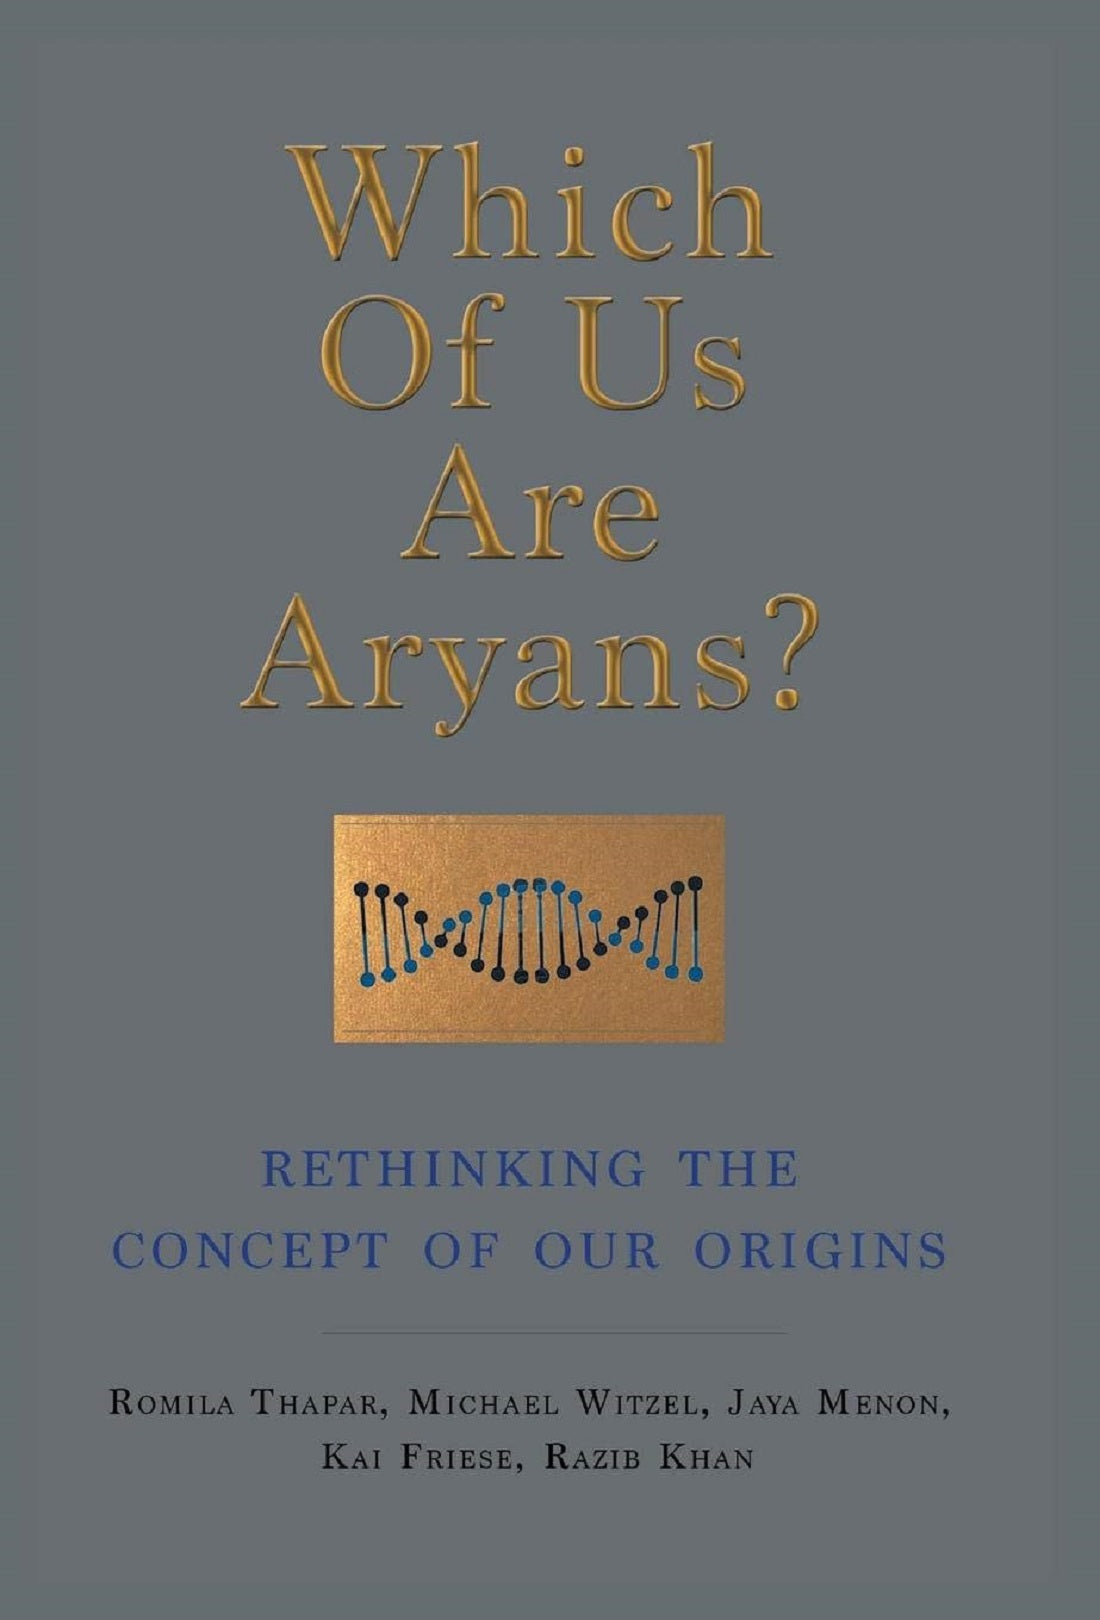 WHICH OF US ARE ARYANS